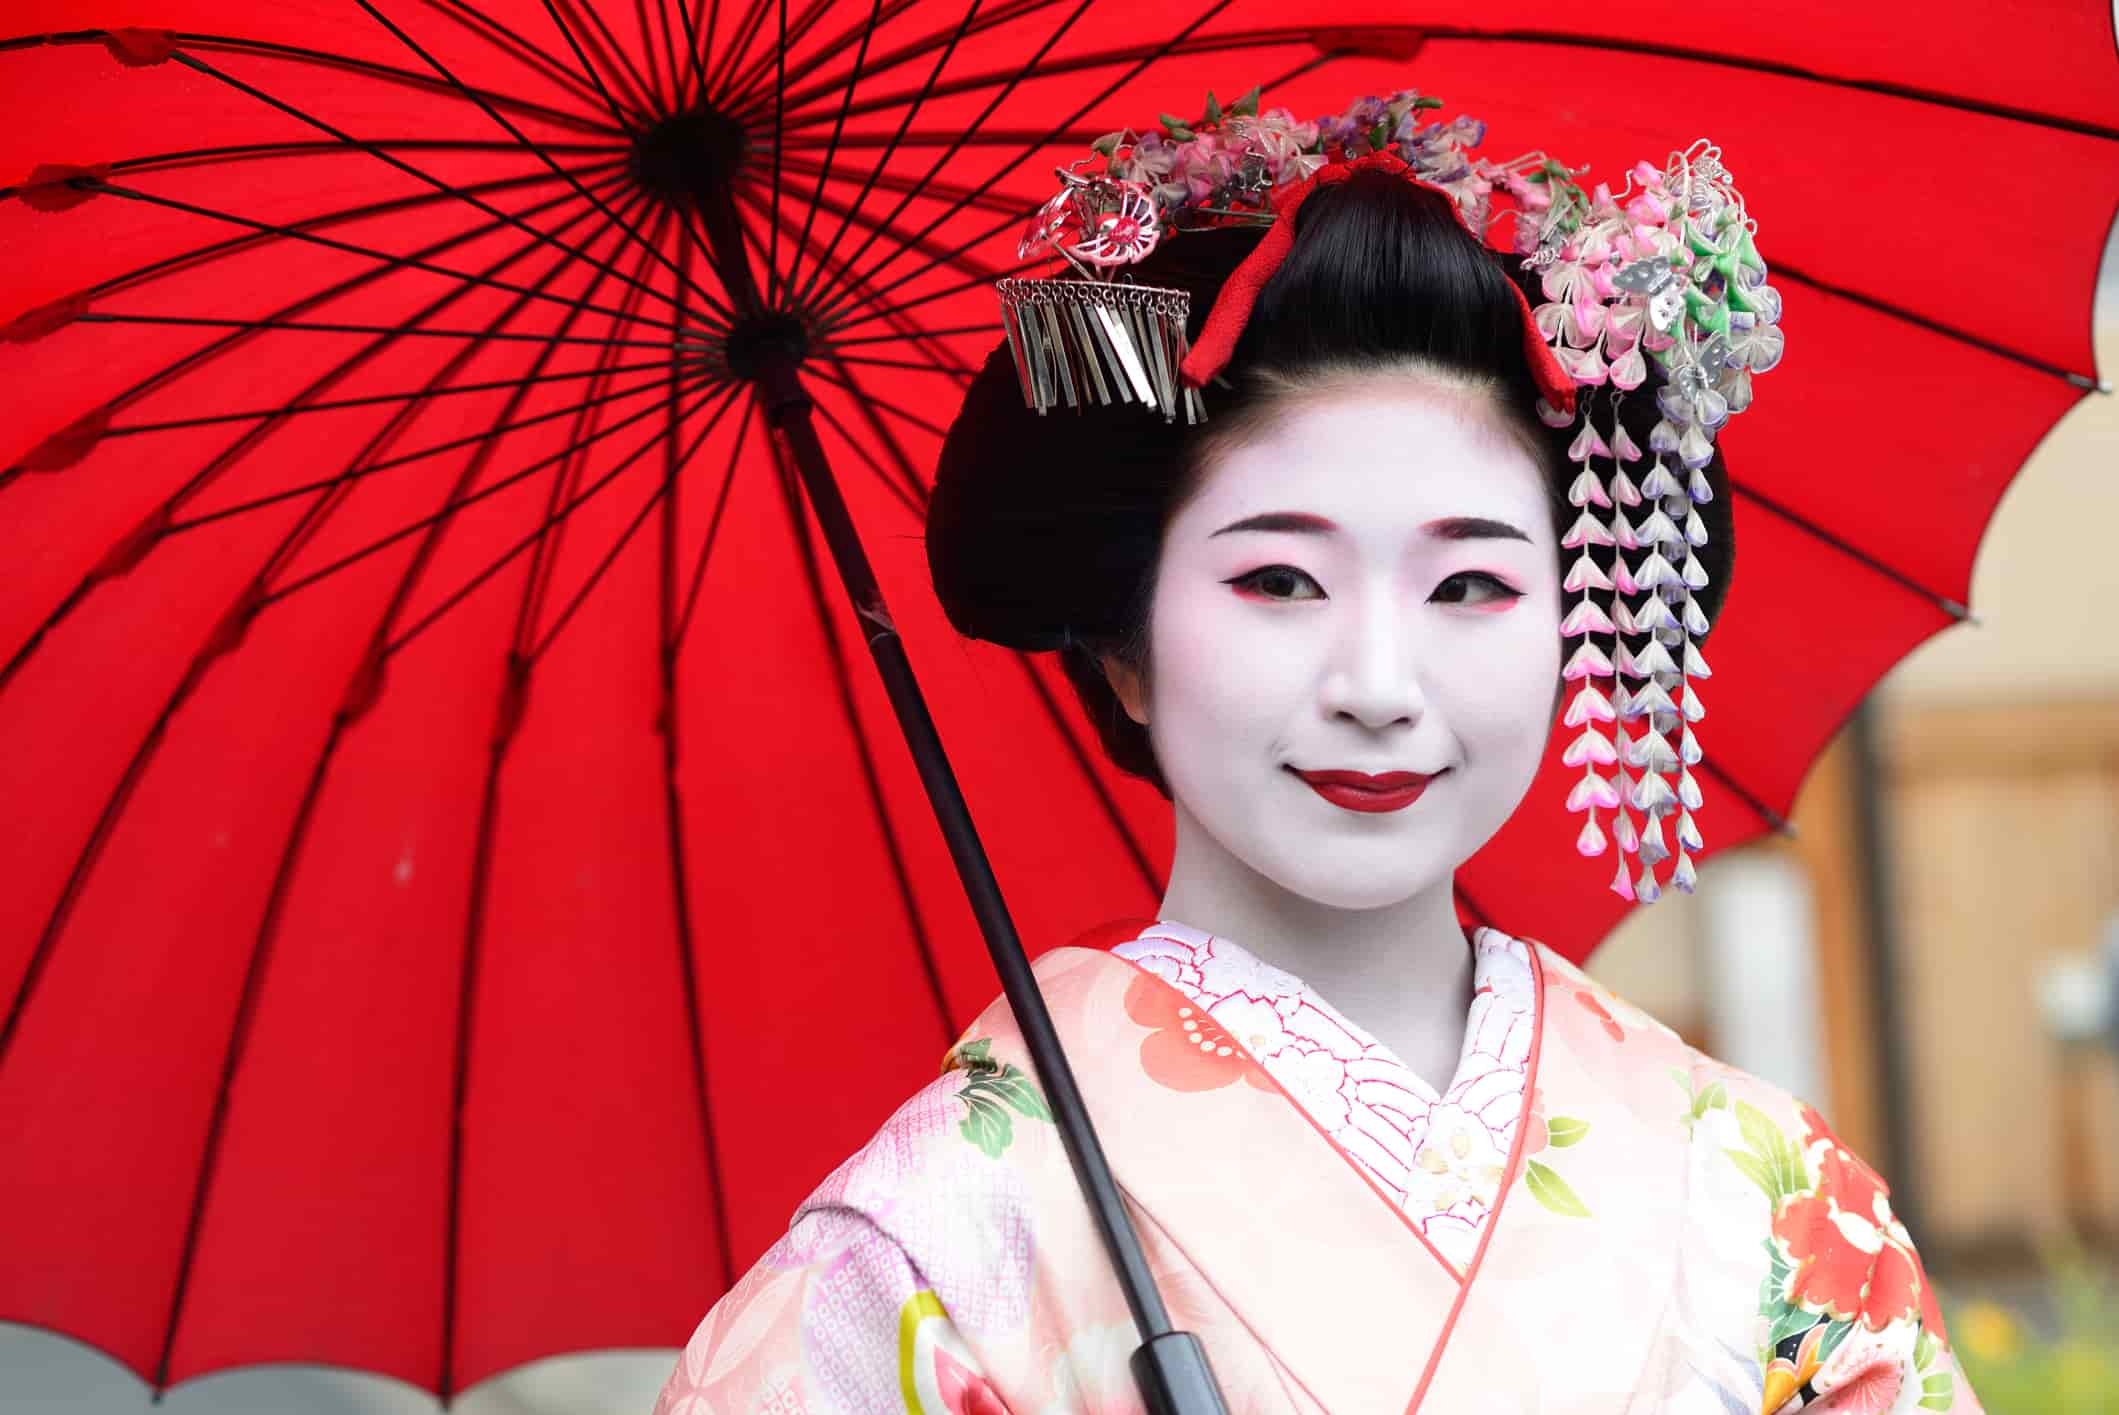 Japanese performers, including geisha, kabuki actors, court ladies, dancers, and others, incorporated white makeup into their artistic expressions.